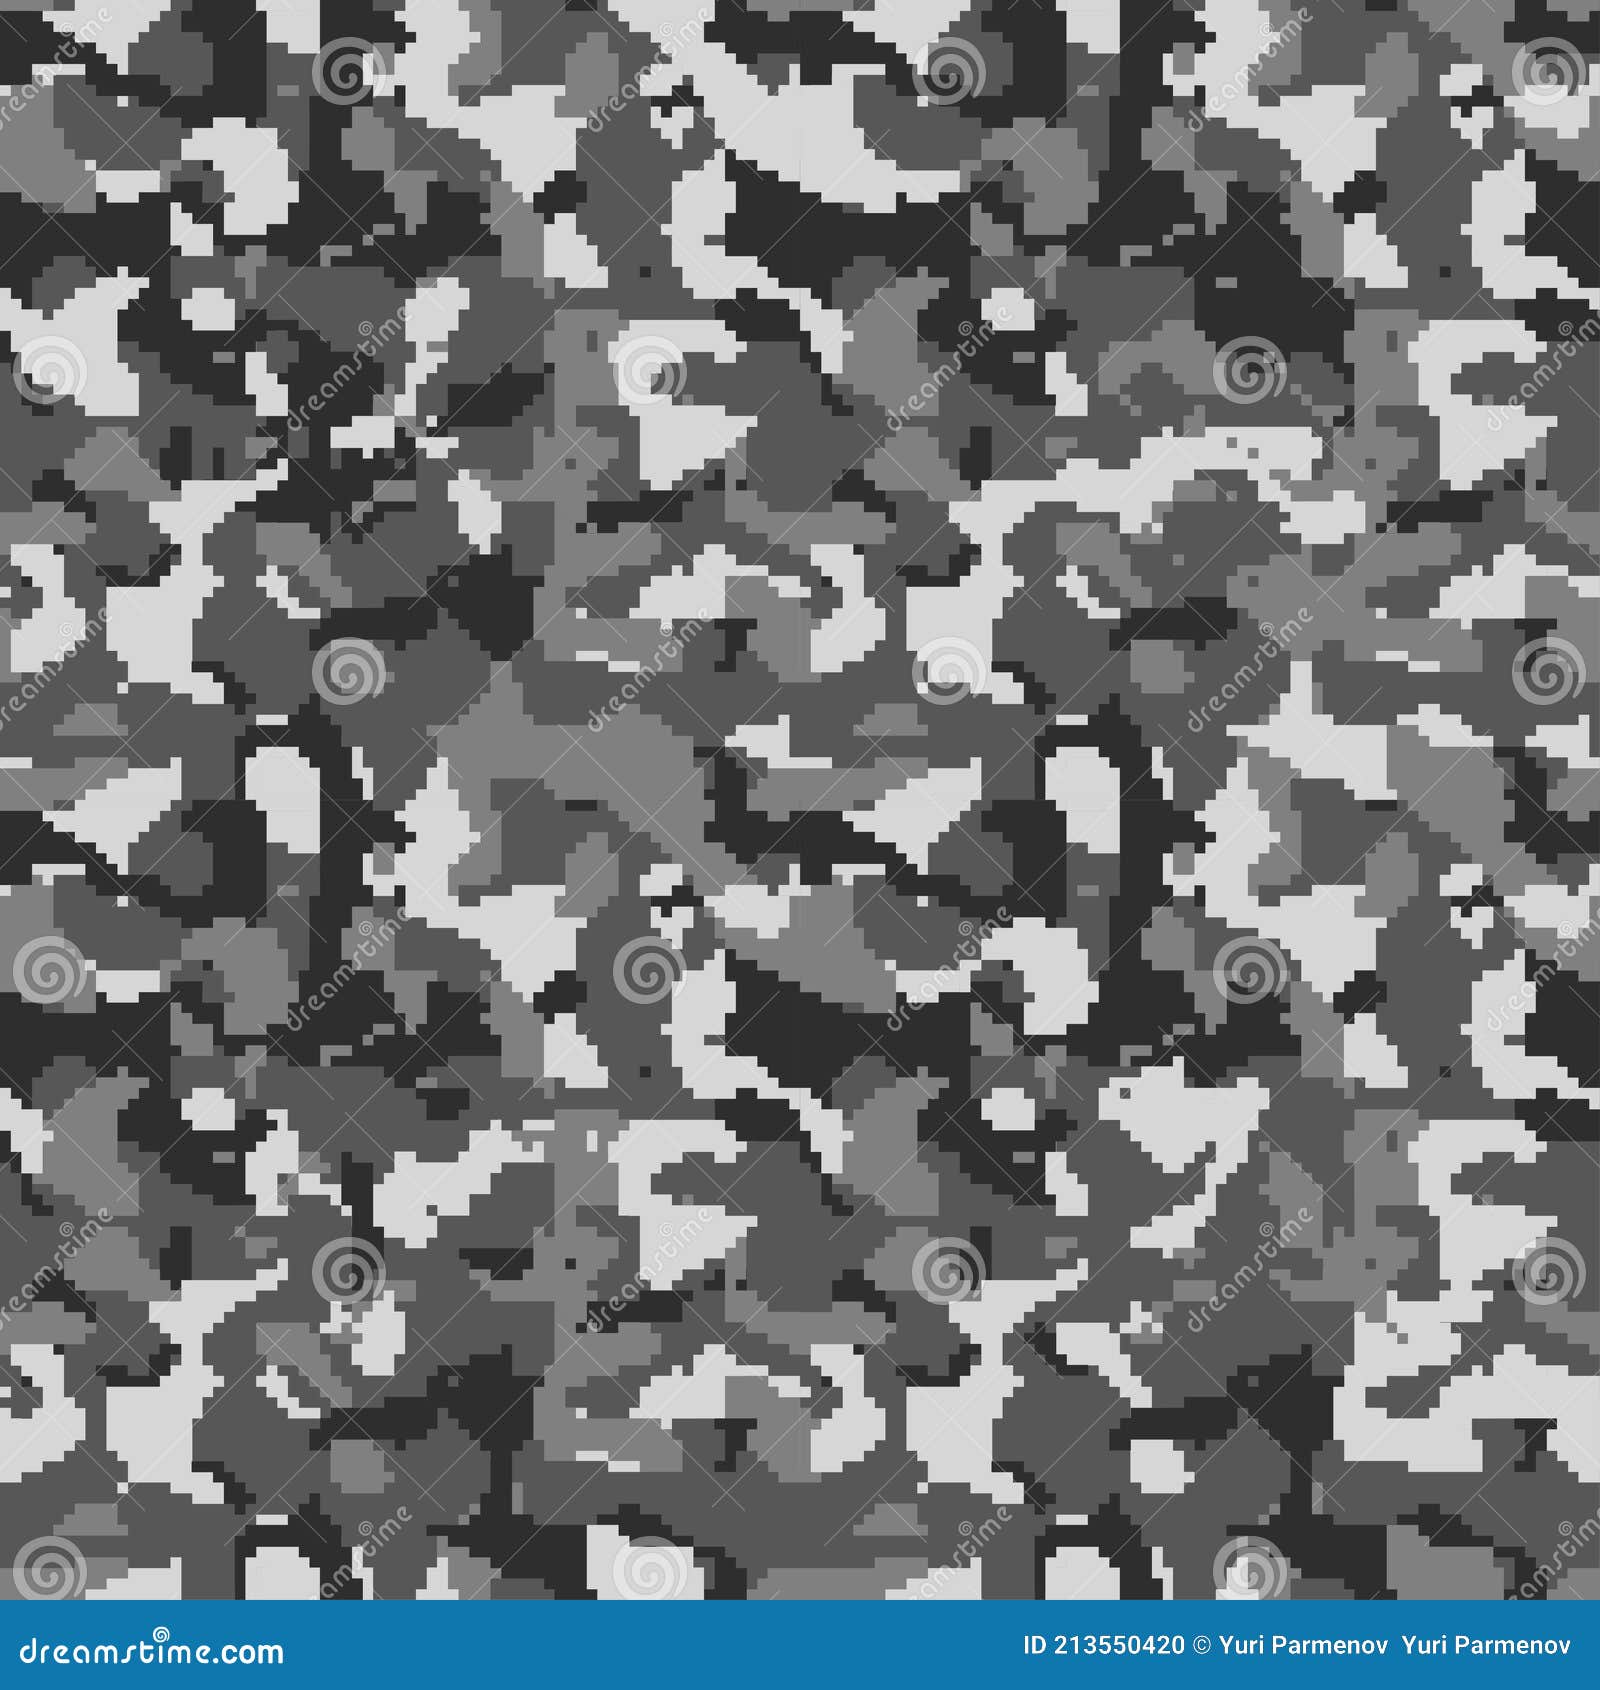 Digital Black Camouflage Seamless Pattern for Your Design. Vector Camo  Texture Stock Vector - Illustration of military, print: 213550420